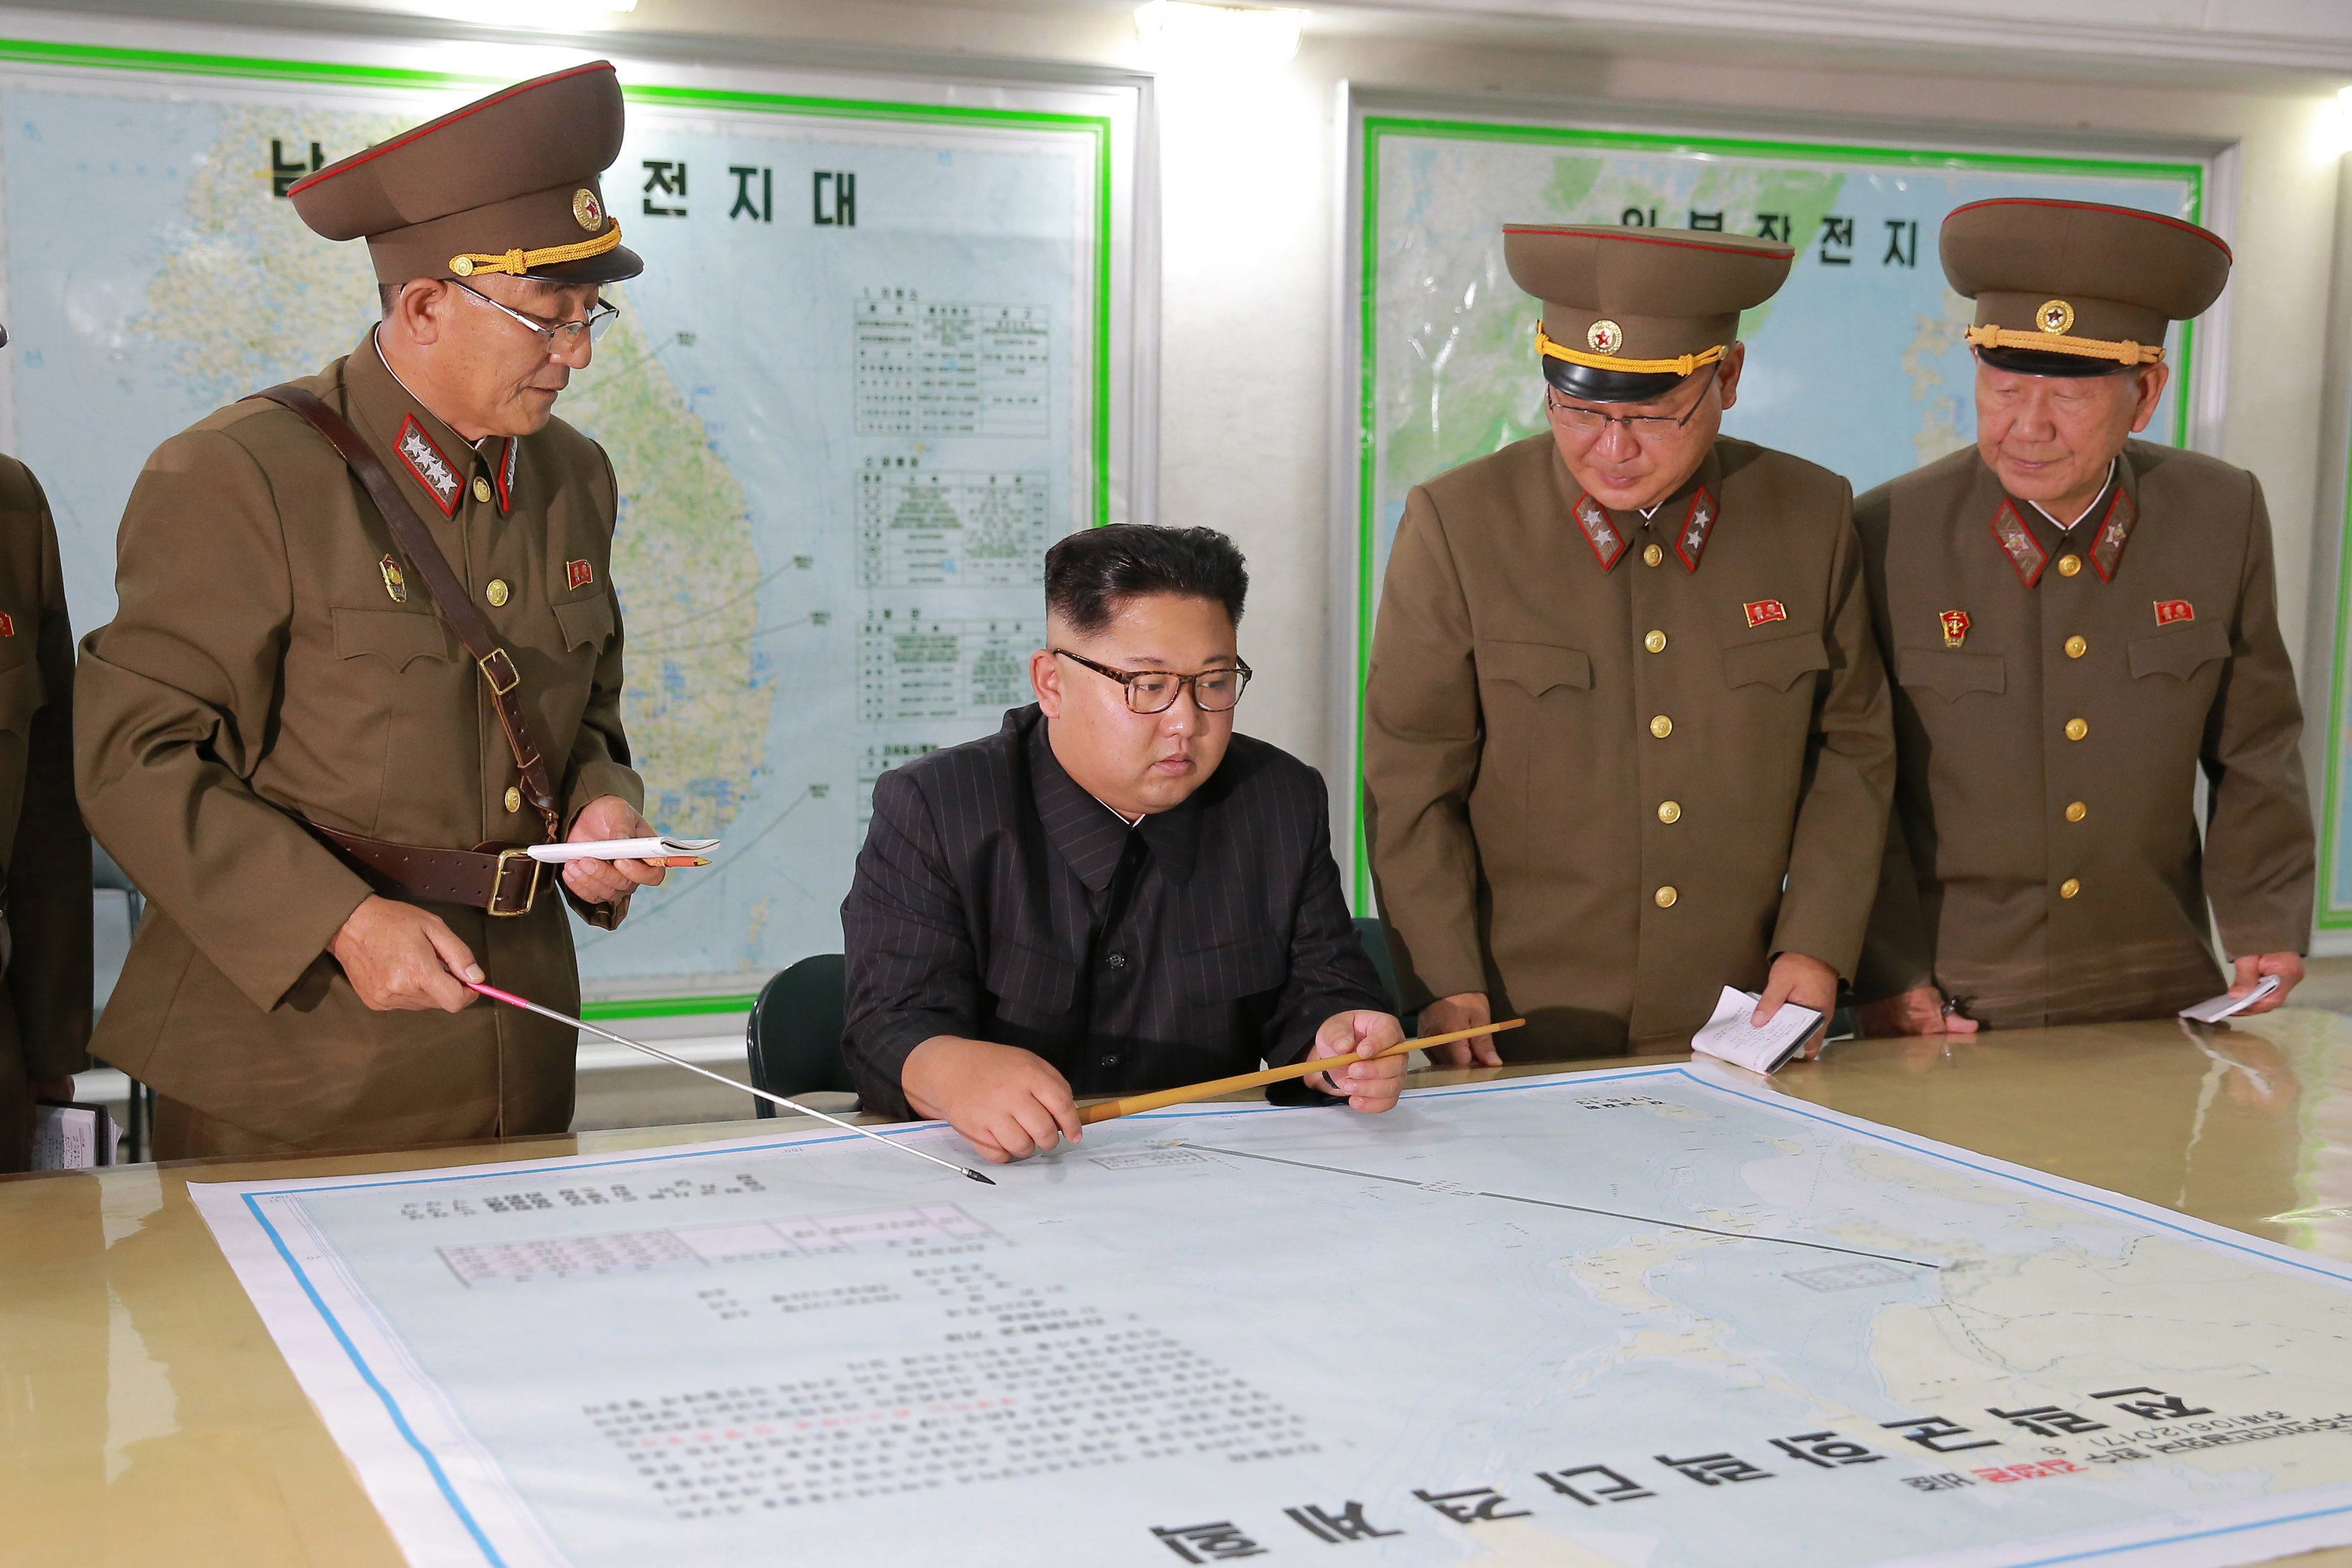 2017-08-14 00:00:00 epa06145192 A picture released by the North Korean Central News Agency (KCNA) North Korean leader Kim Jong Un inspecting plans to fire missiles towards the US Pacific territory of Guam at the Command of the Strategic Force of the Korean People's Army (KPA), Pyongyang, DPRK: North Korean 14 August 2017, (issued 15 August 2017). According to North Korean state media on 09 August 2017, the North is considering a potential pre-emptive strike with medium-to-long-range strategic ballistic missiles on Guam, where US tactical bombers are based. The threat follows US President Donald J. Trump's warning to Pyongyang that any threat to the USA 'will be met with fire and fury like the world has never seen.' The exchanges marked rising tensions between the two countries. EPA/KCNA